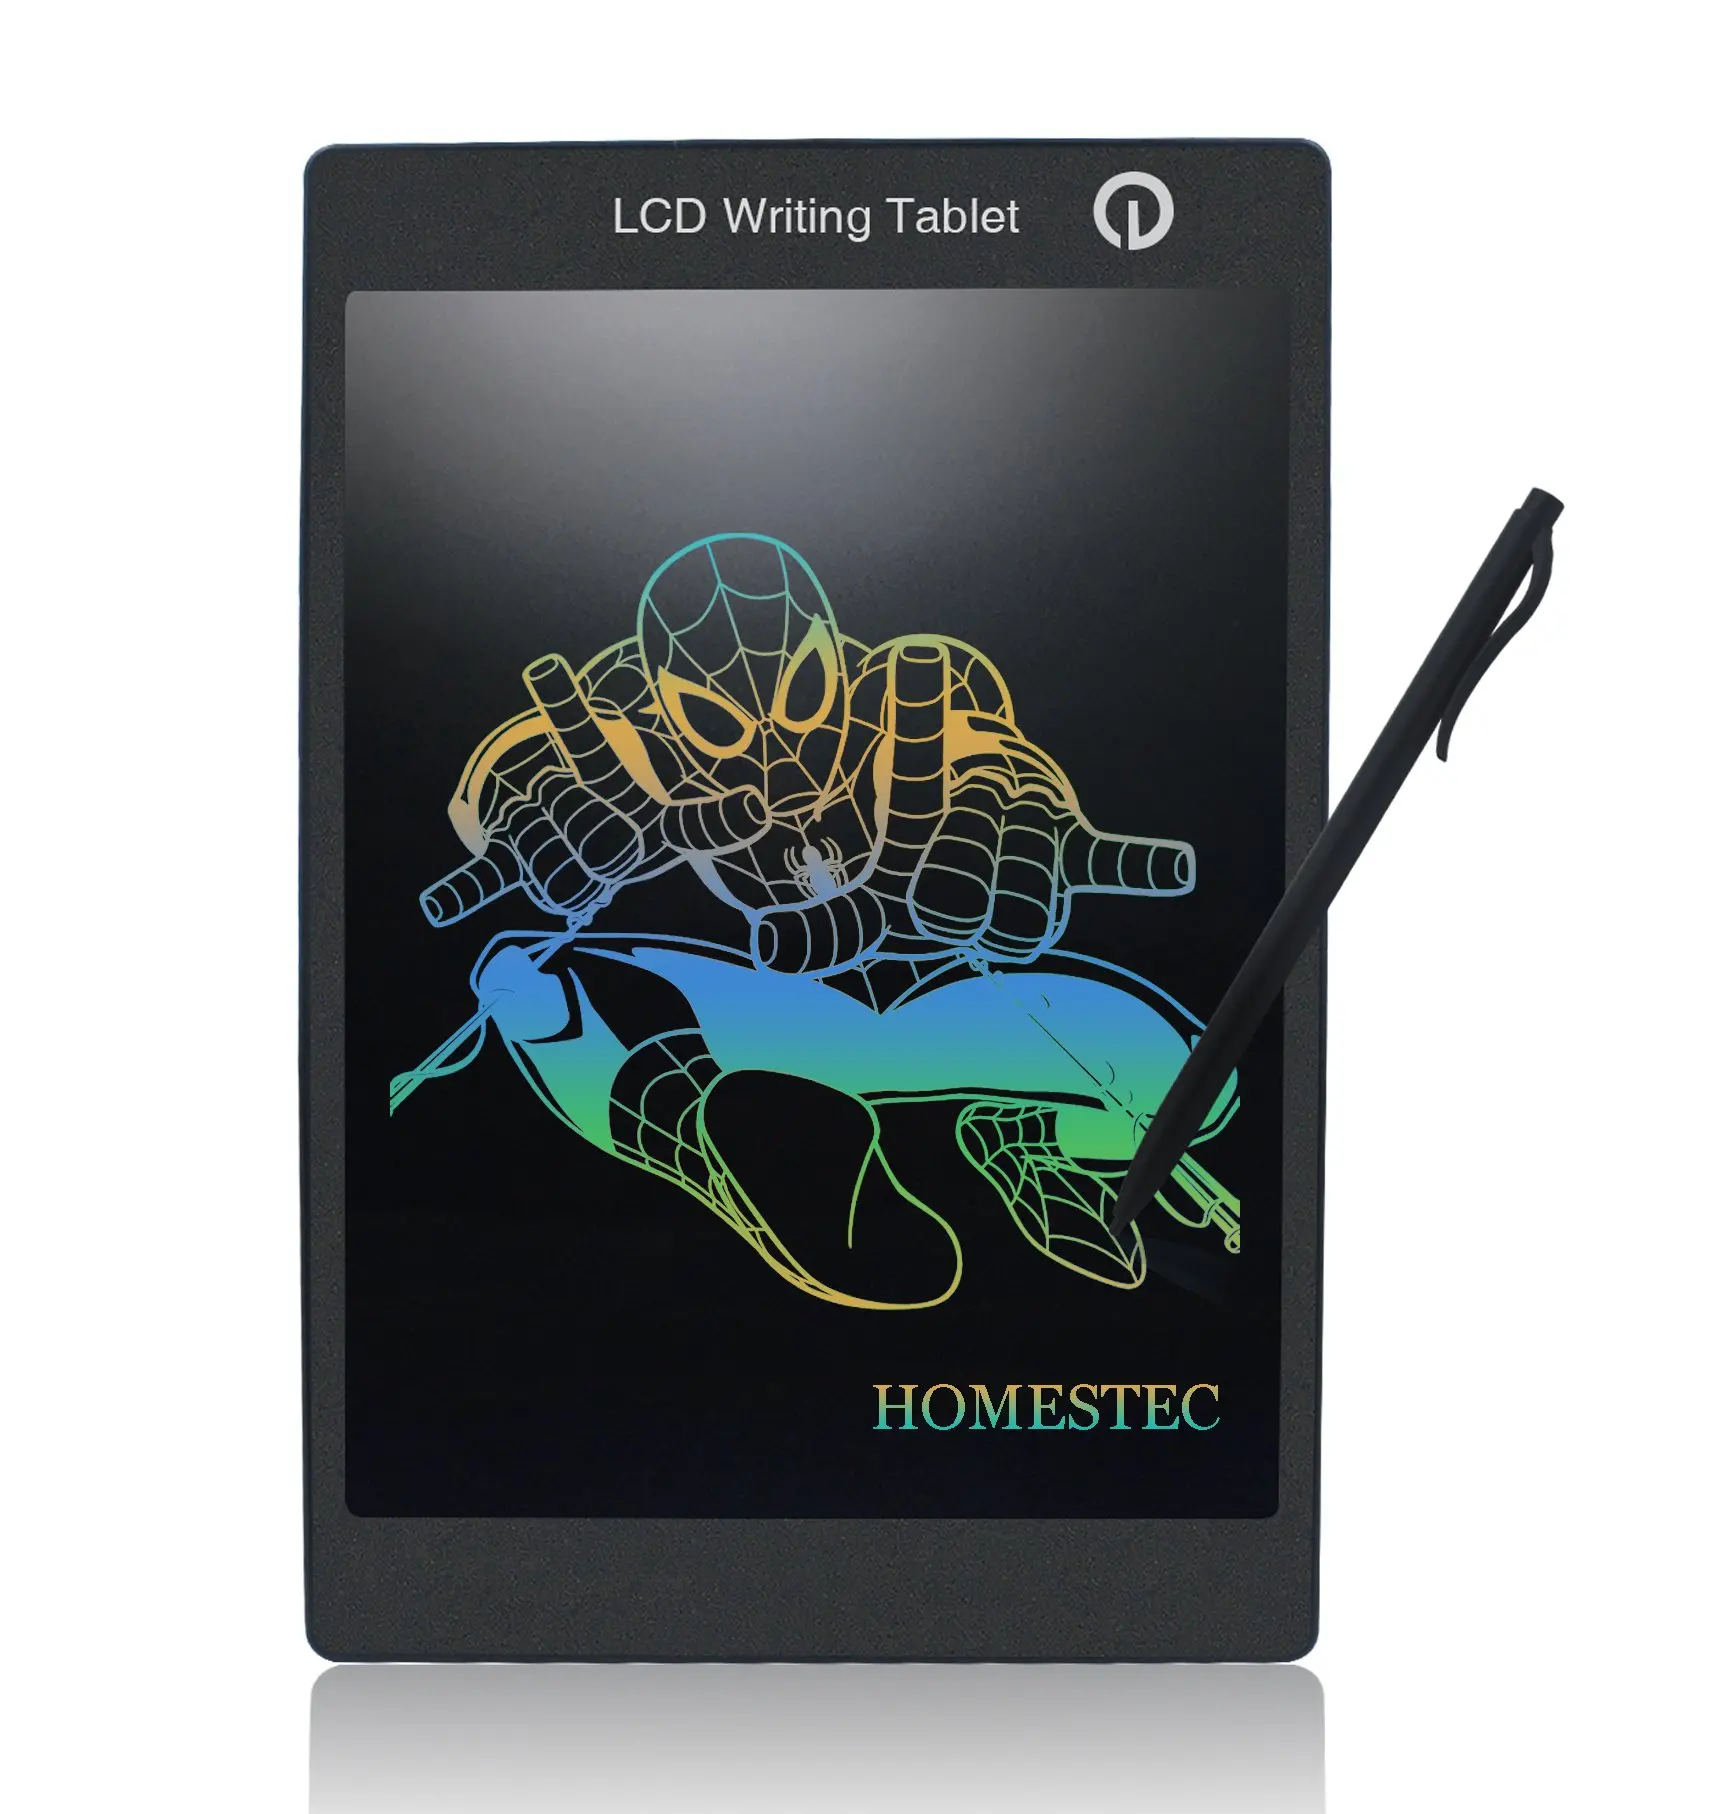 Screen Lock Included Homestec 10-Inch LCD Writing Tablet-Can Be Used as Office Whiteboard Bulletin Board Kitchen Memo Notice Fridge Board Large Daily Planner Gifts for Kids